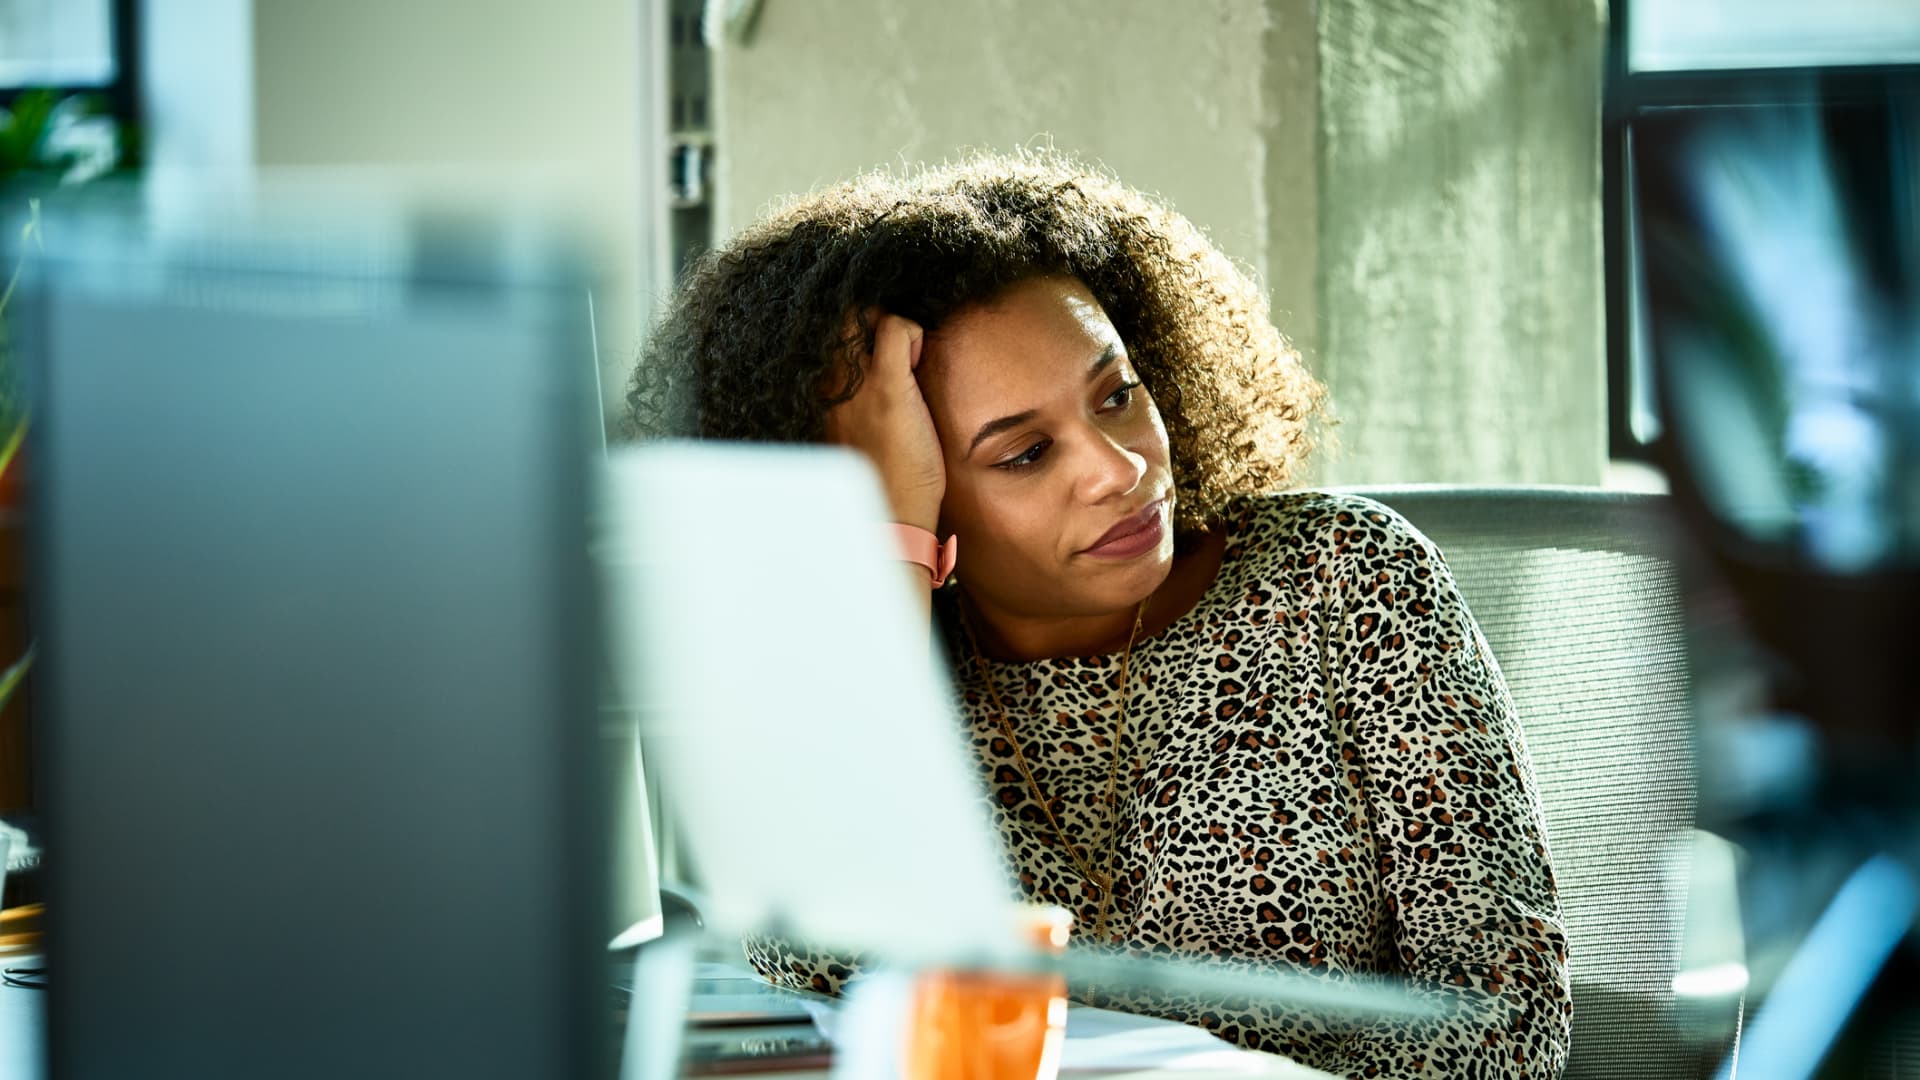 Black women are in 'survival mode' at work—and company diversity efforts 'fall short'